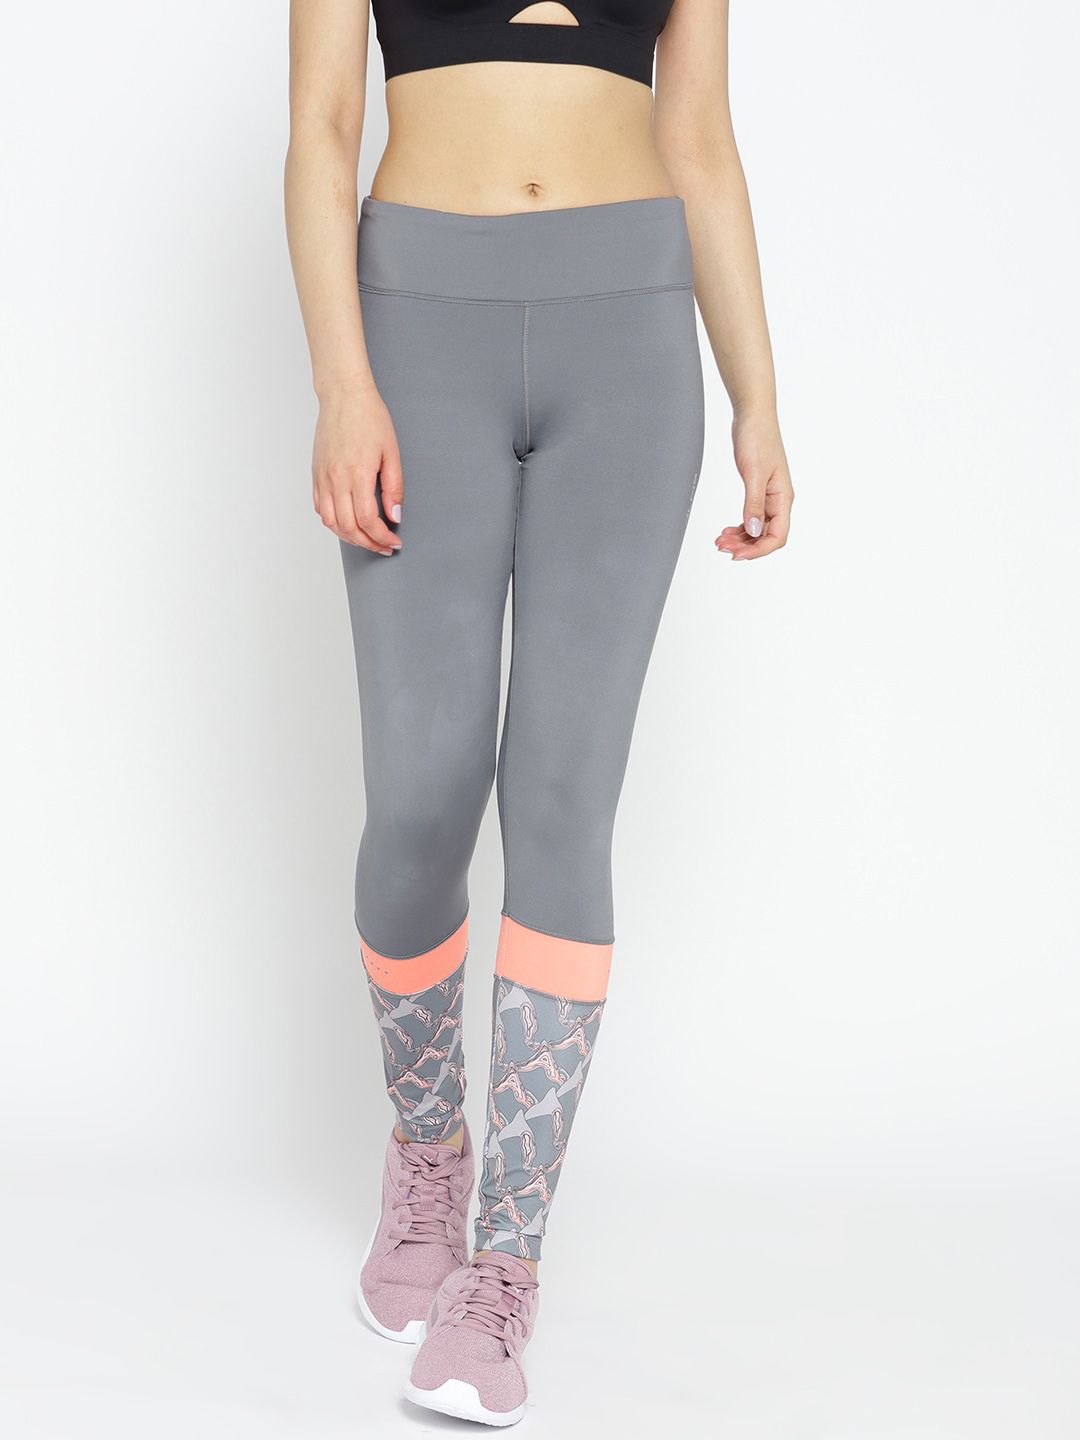 Alcis Women Grey Solid Running Tights with Printed Detail Price in India